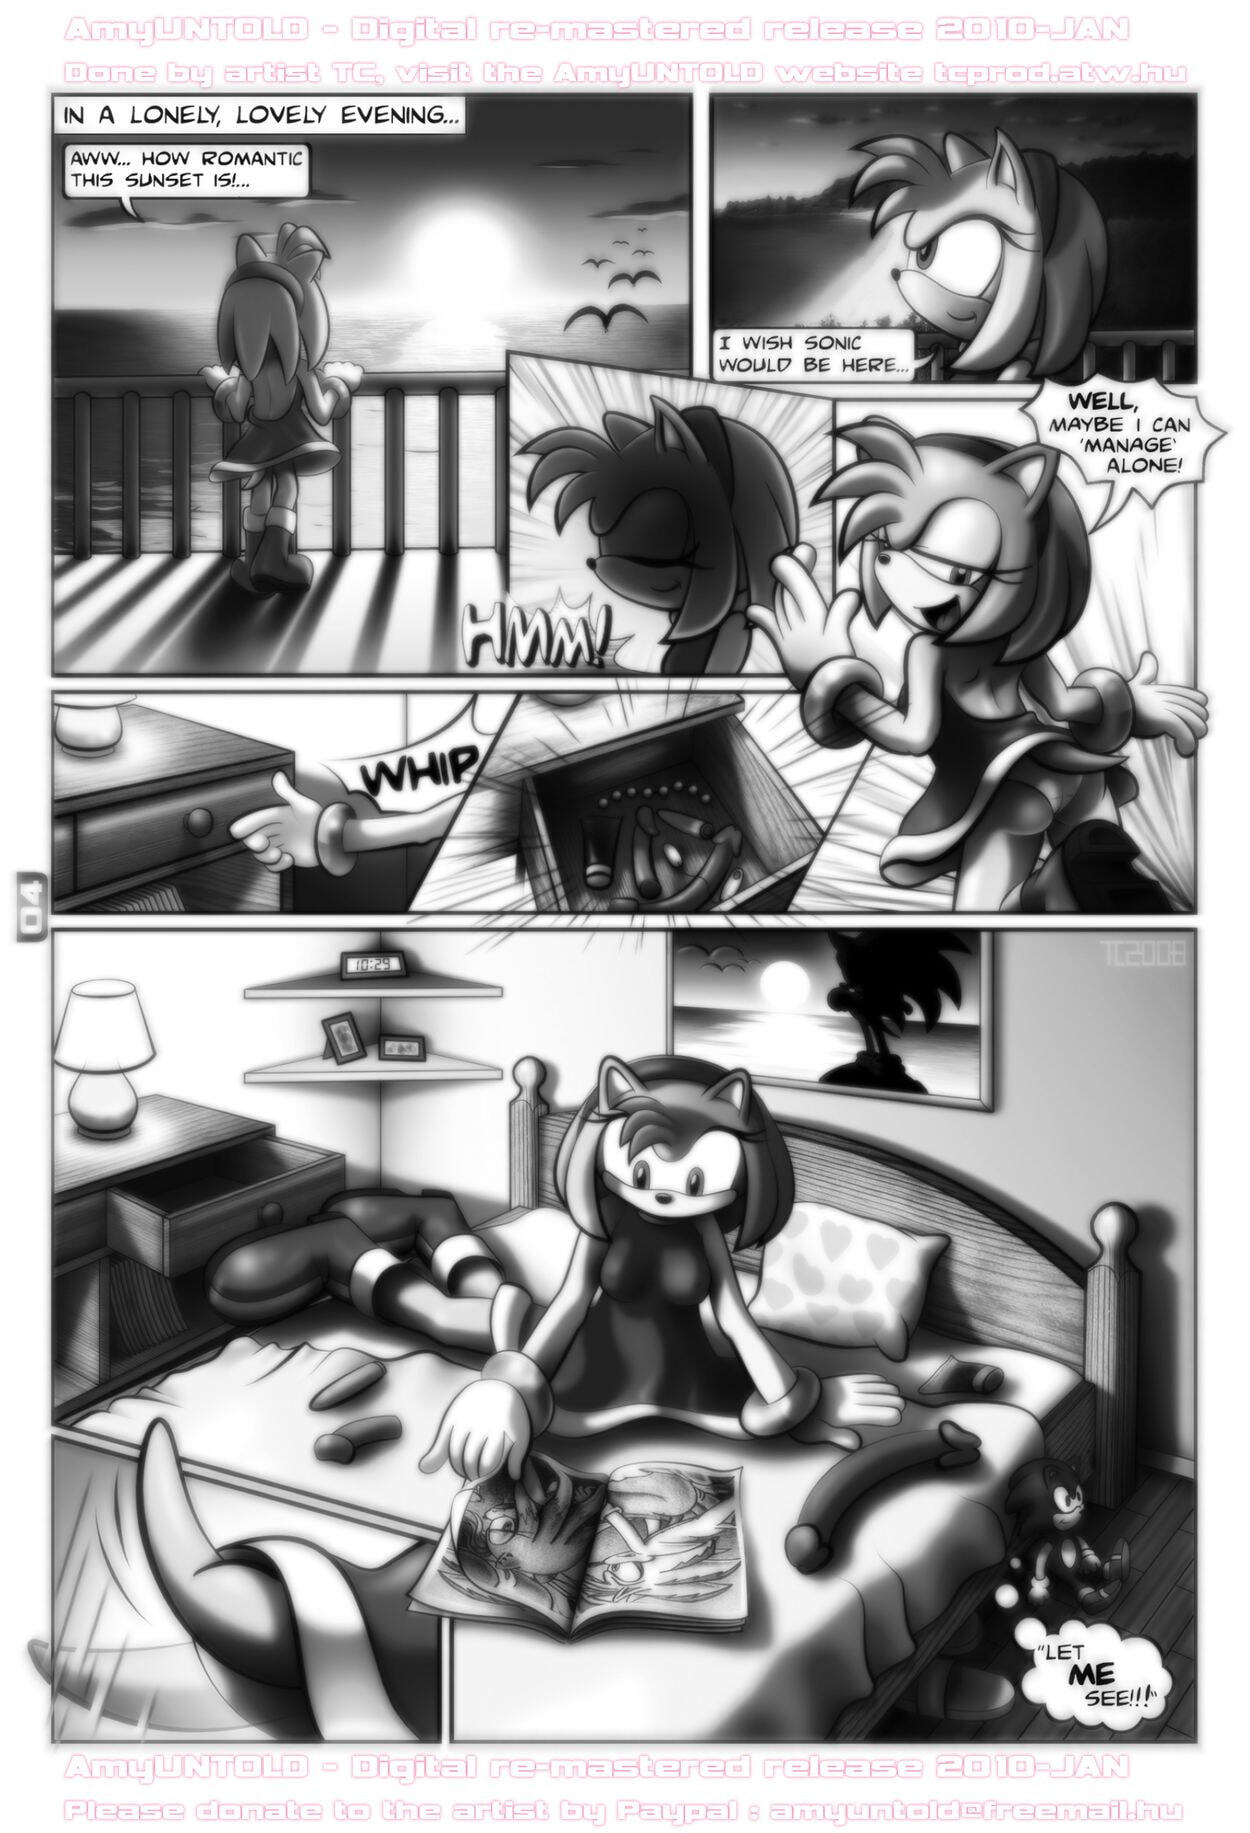 Amy Untold - Finally - Page 4